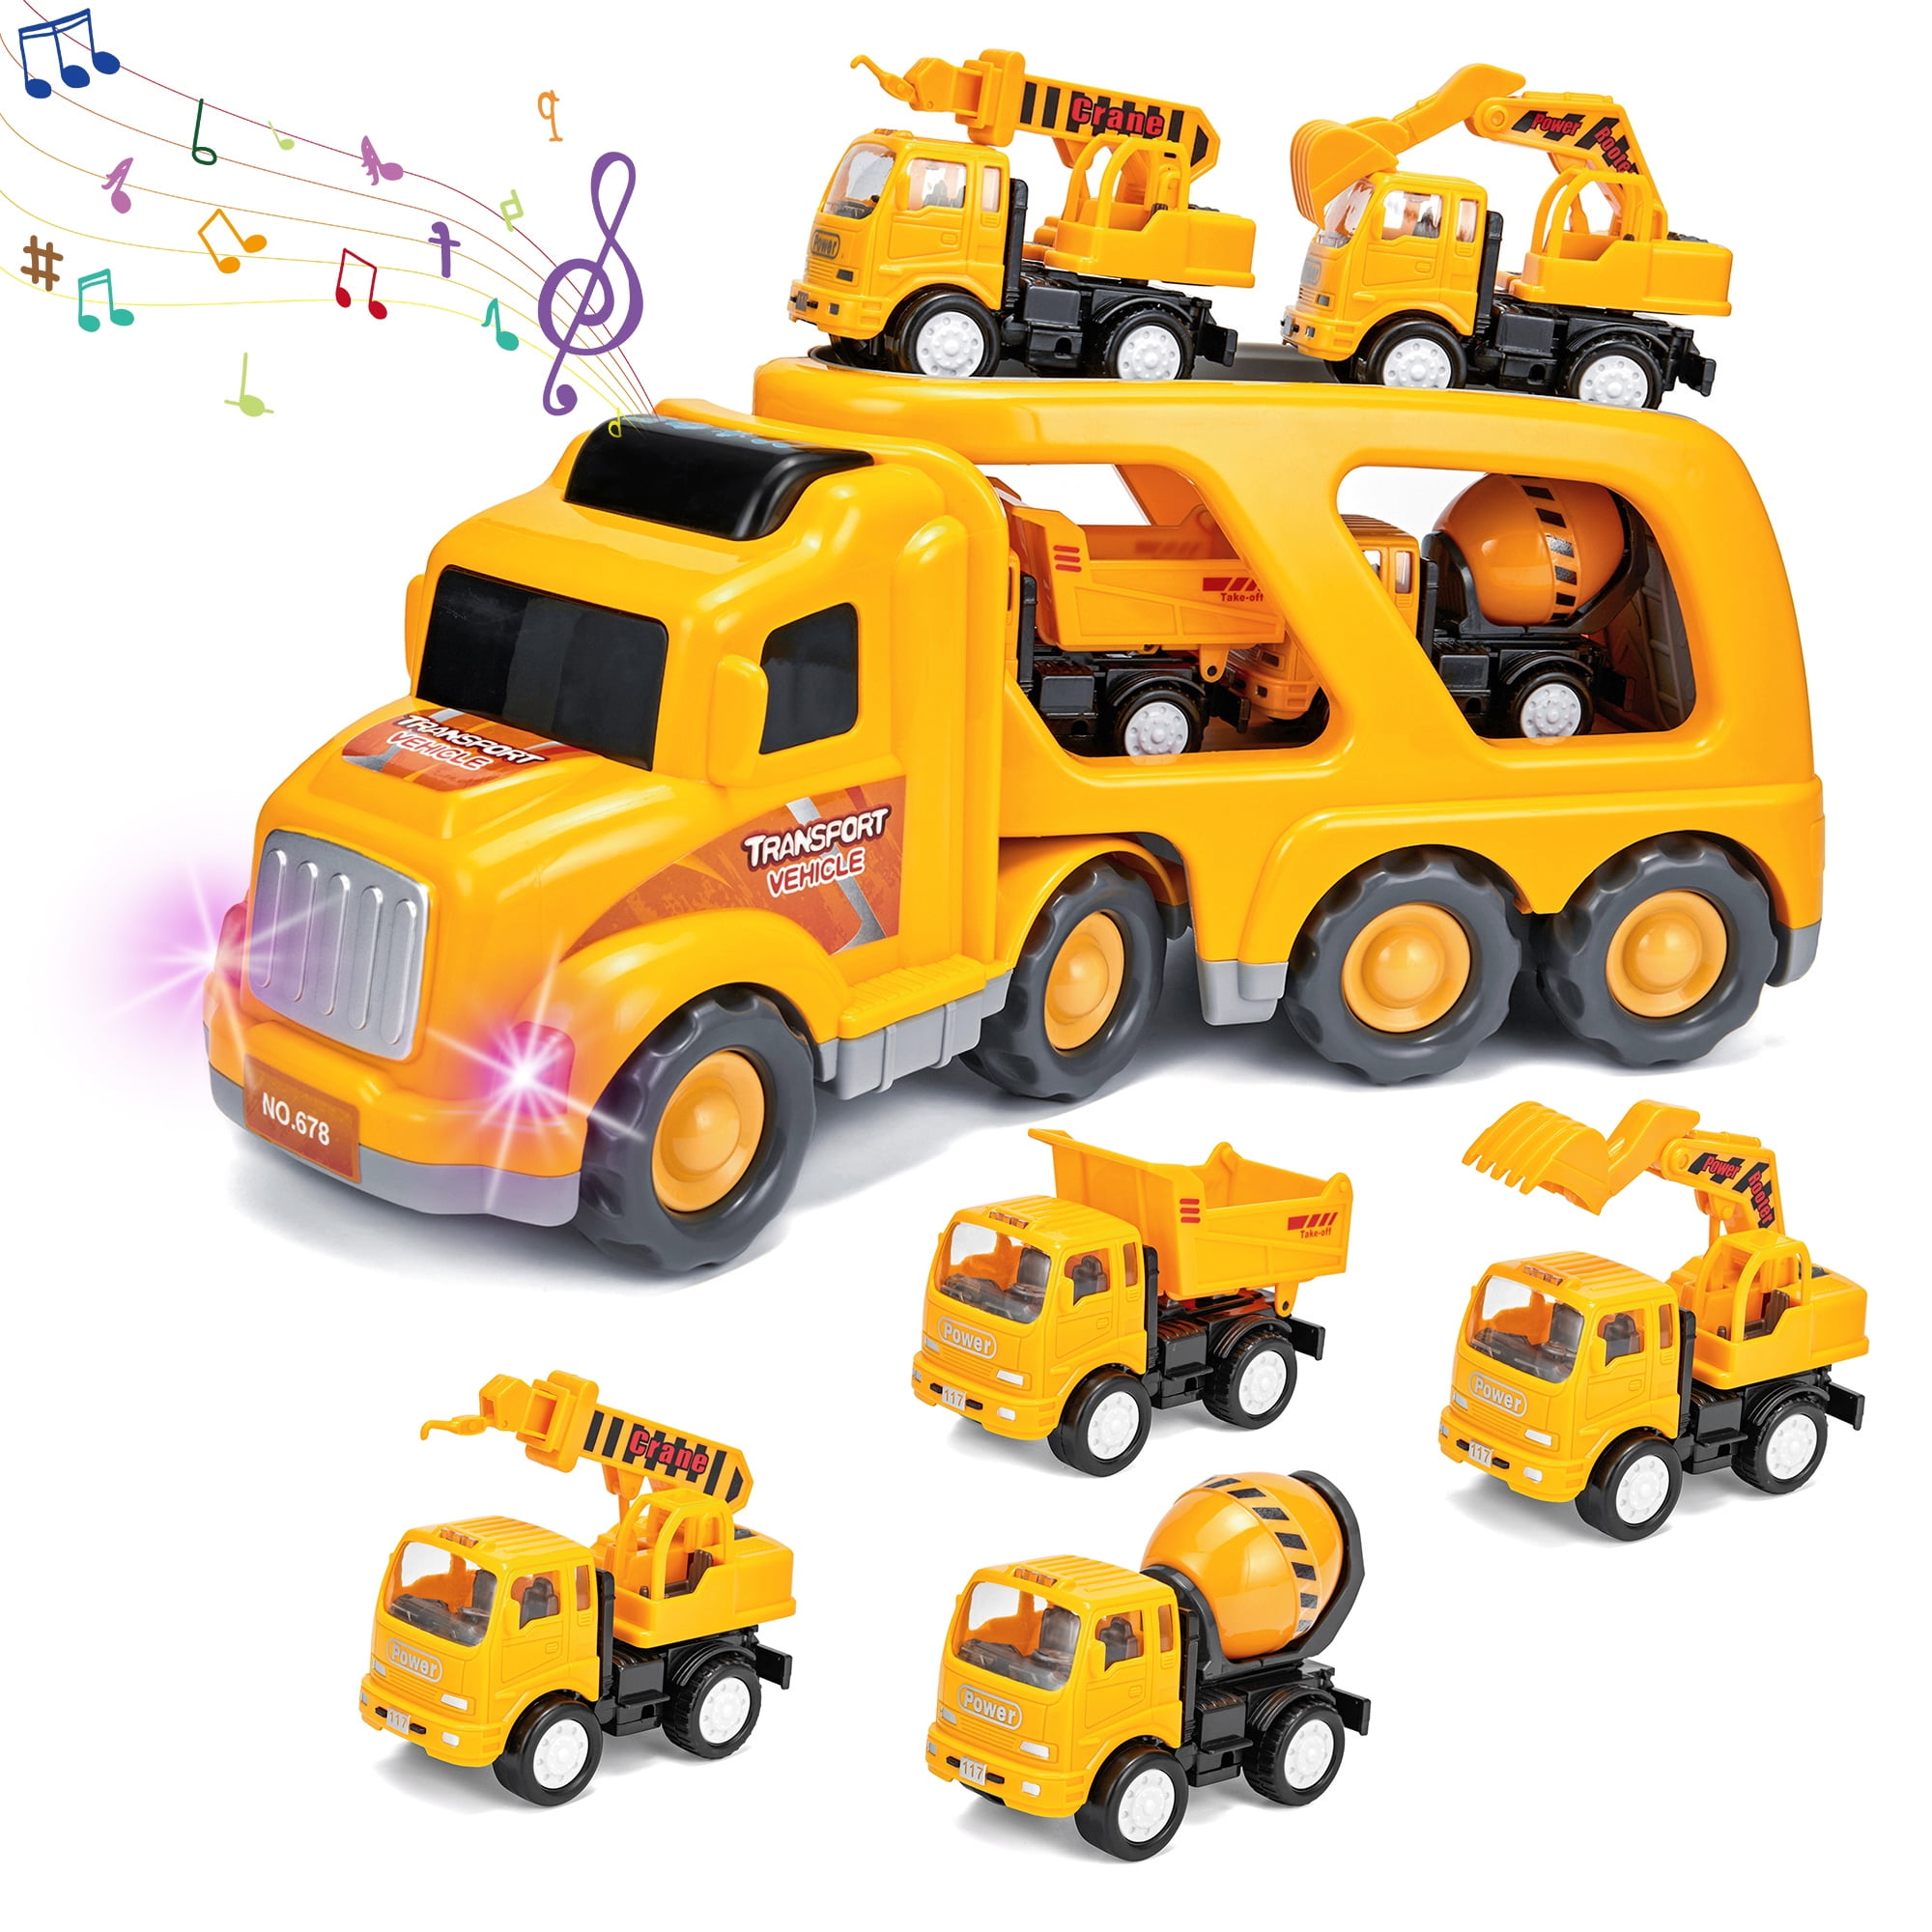 Truck Toy Sets,Construction Cargo Transport Vehicles Playset,Gifts for Boys Kids